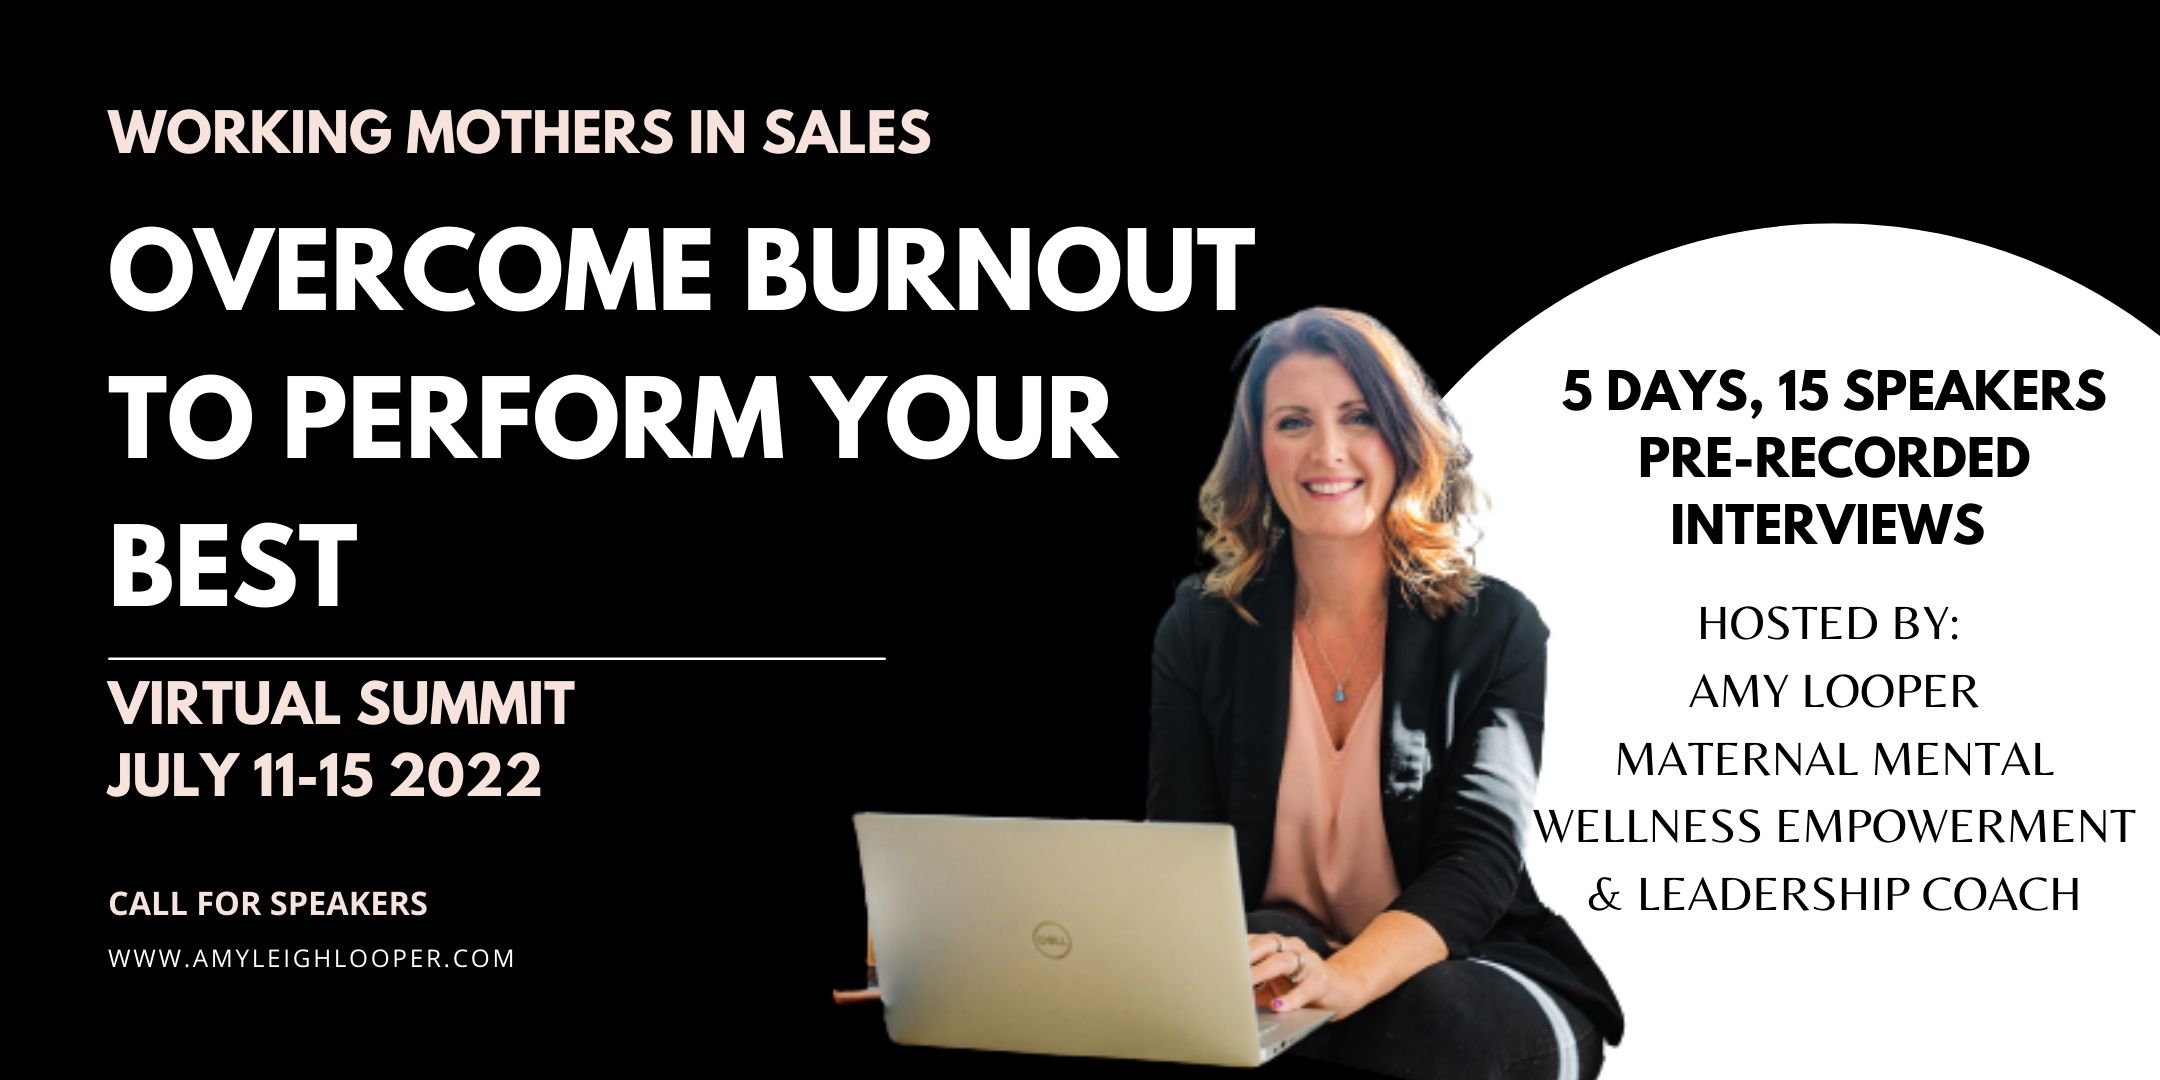 OVERCOME BURNOUT TO PERFORM YOUR BEST SUMMIT COVER (1)